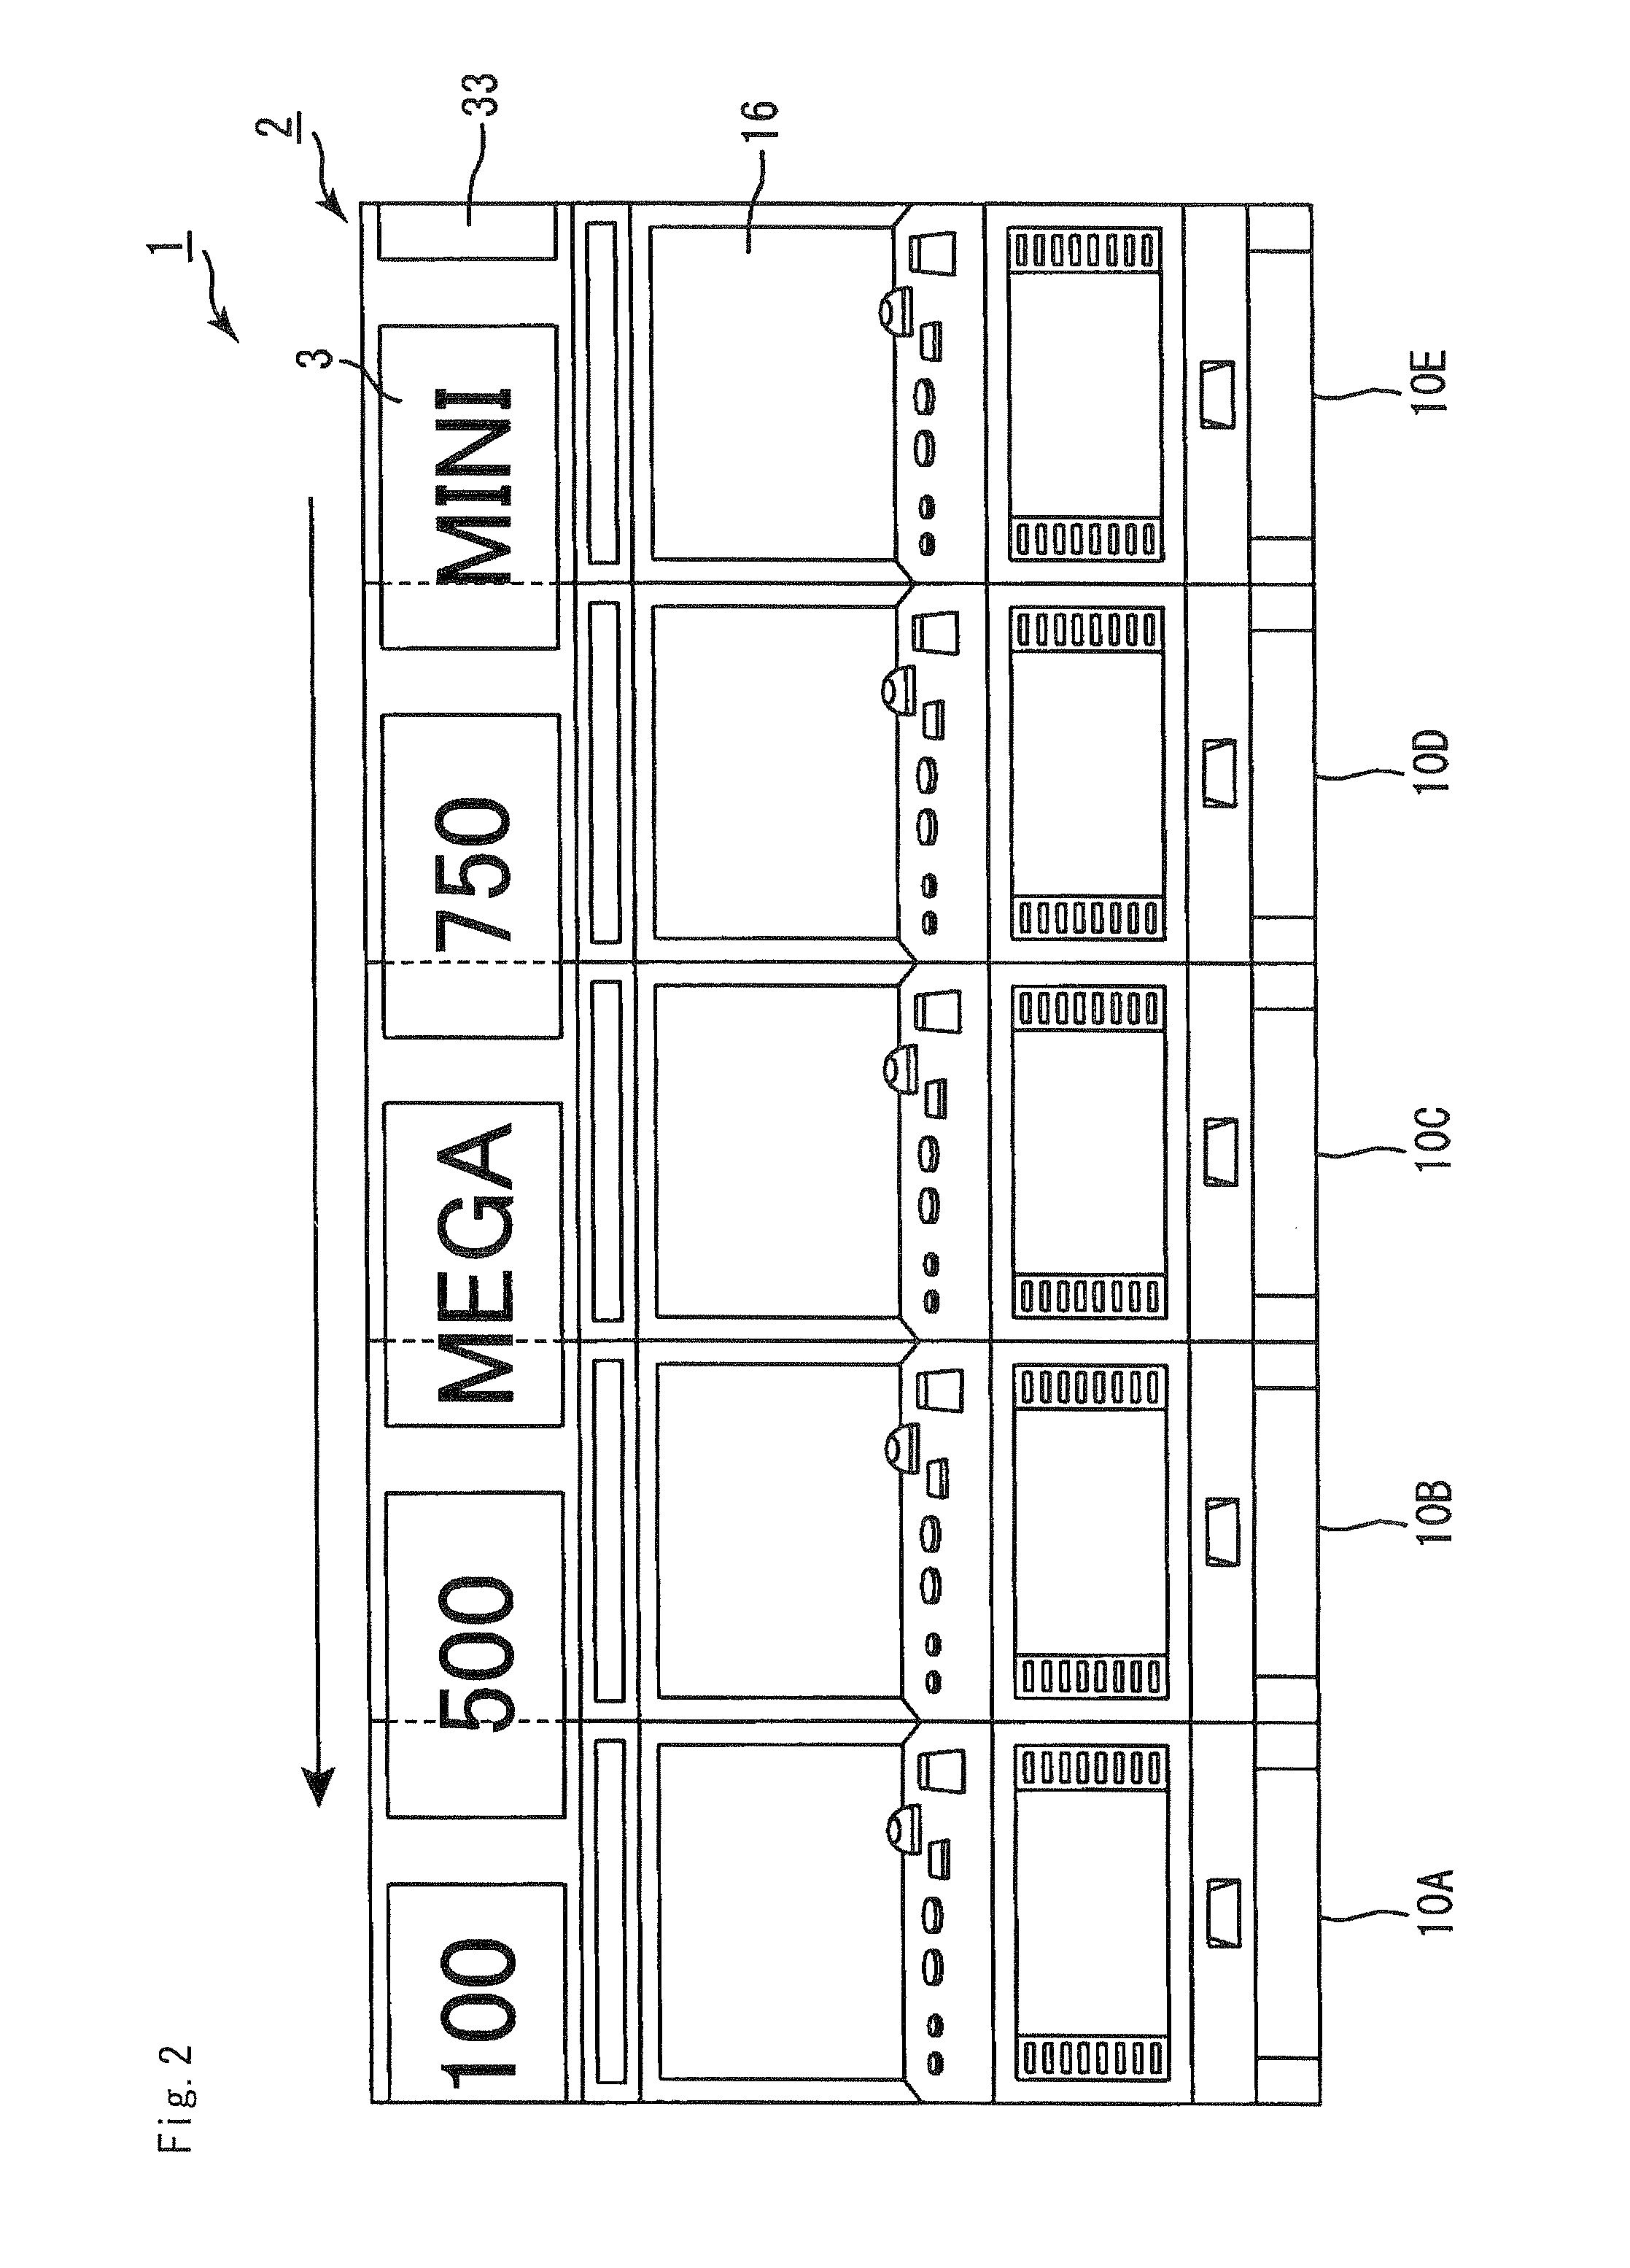 Gaming system comprising a plurality of slot machines and method for controlling gaming machine